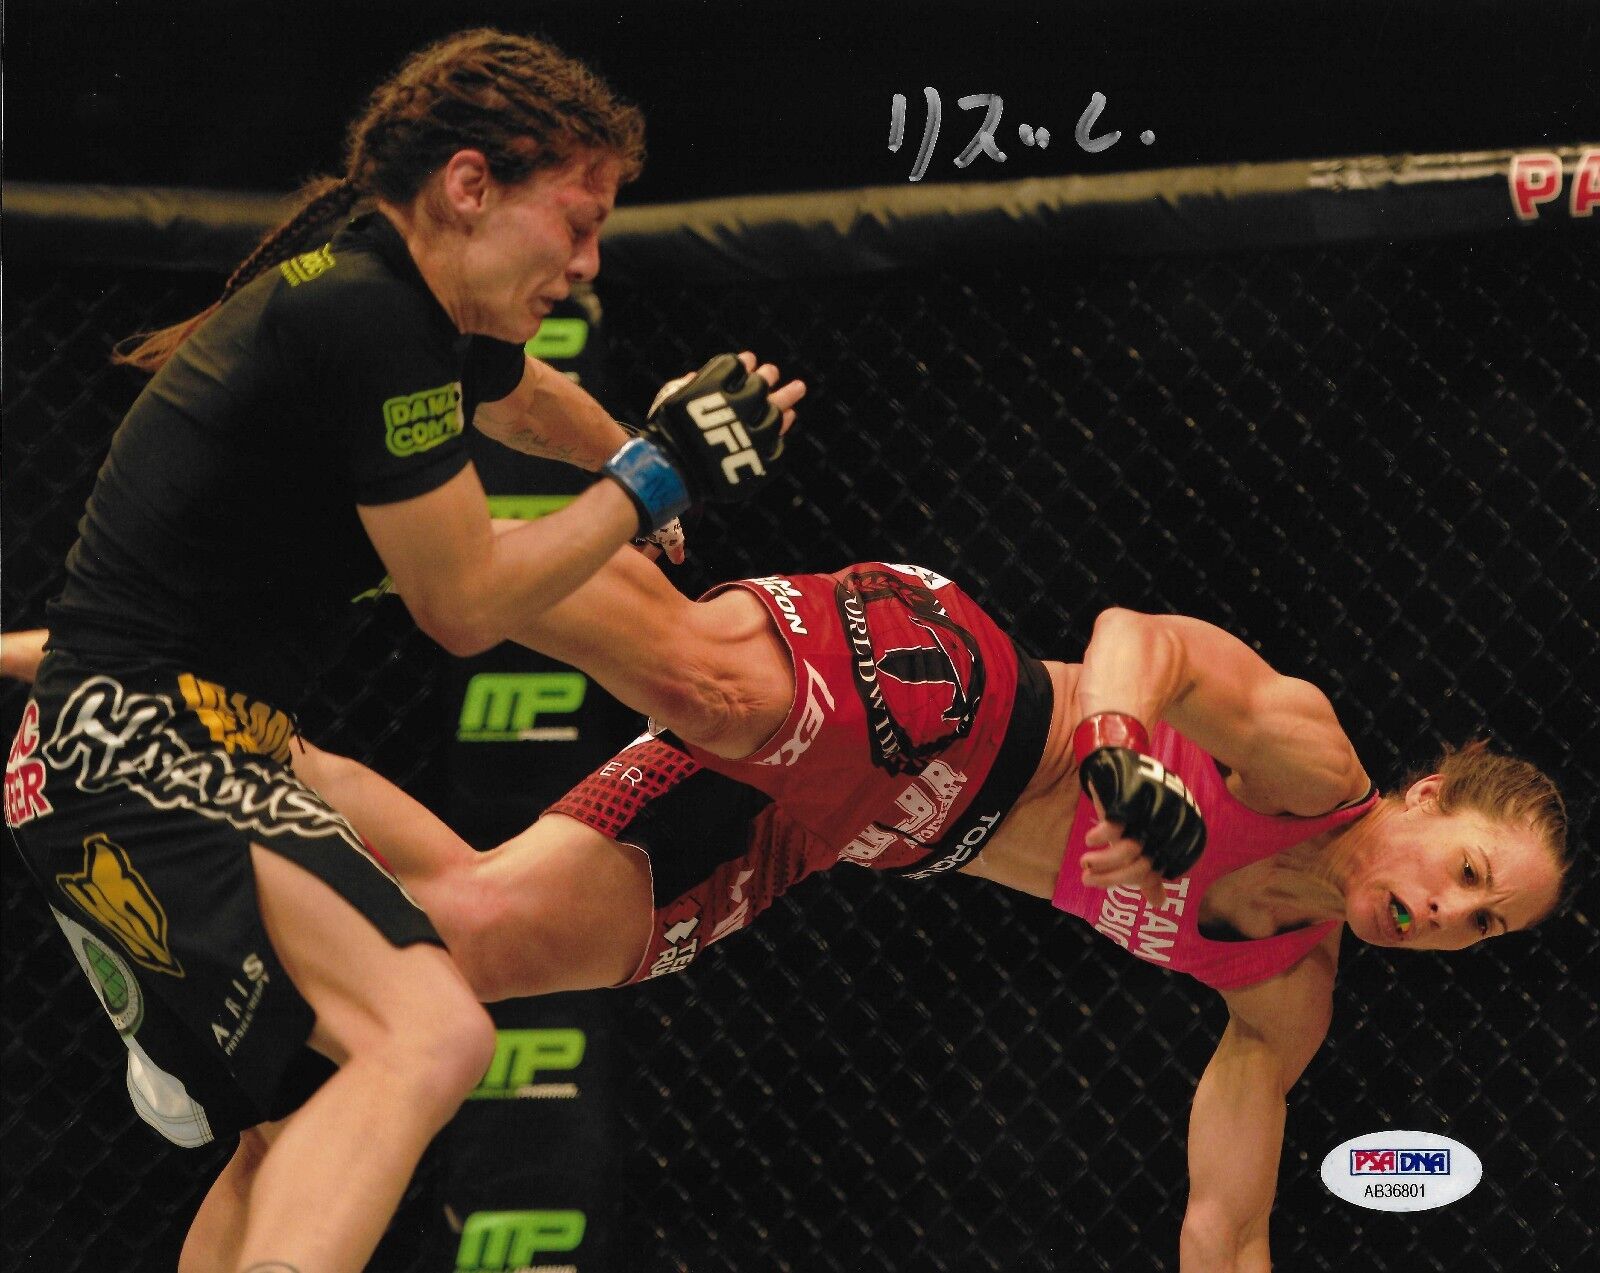 Liz Carmouche Signed 8x10 Photo Poster painting PSA/DNA UFC Fight Night 63 Picture Autograph 1